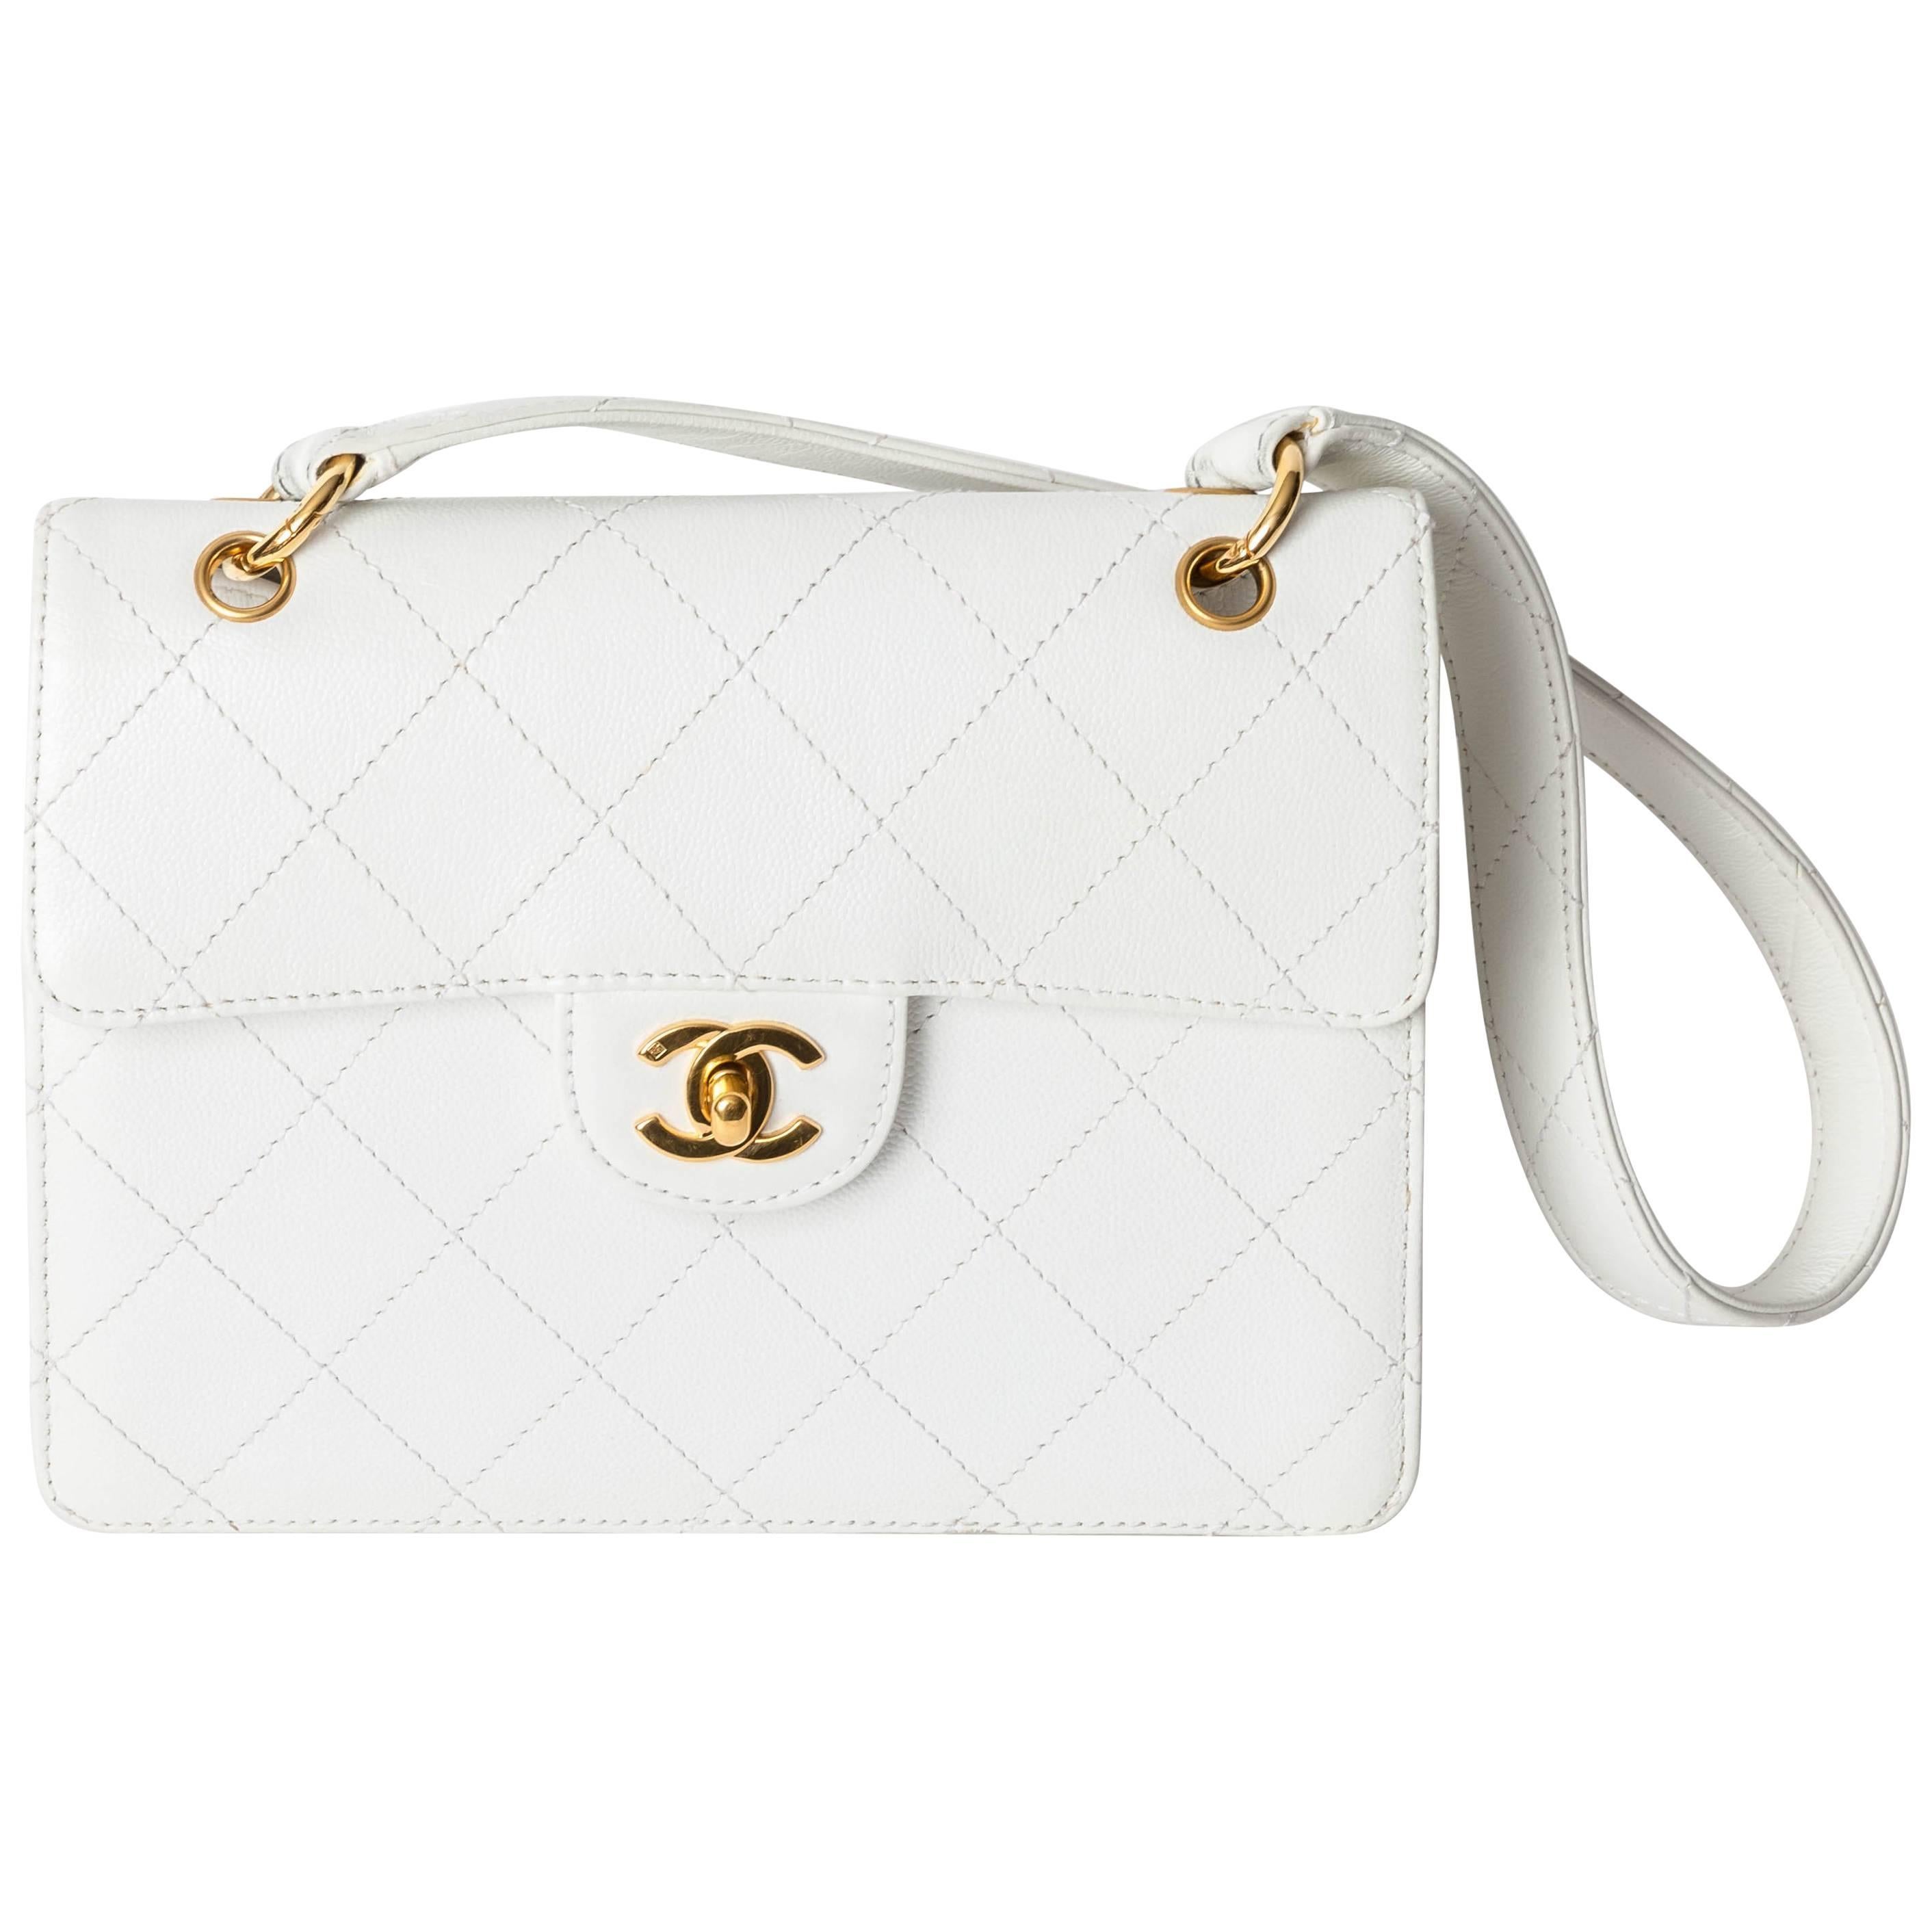 Chanel Shoulder Bag in White Caviar with Gold Hardware